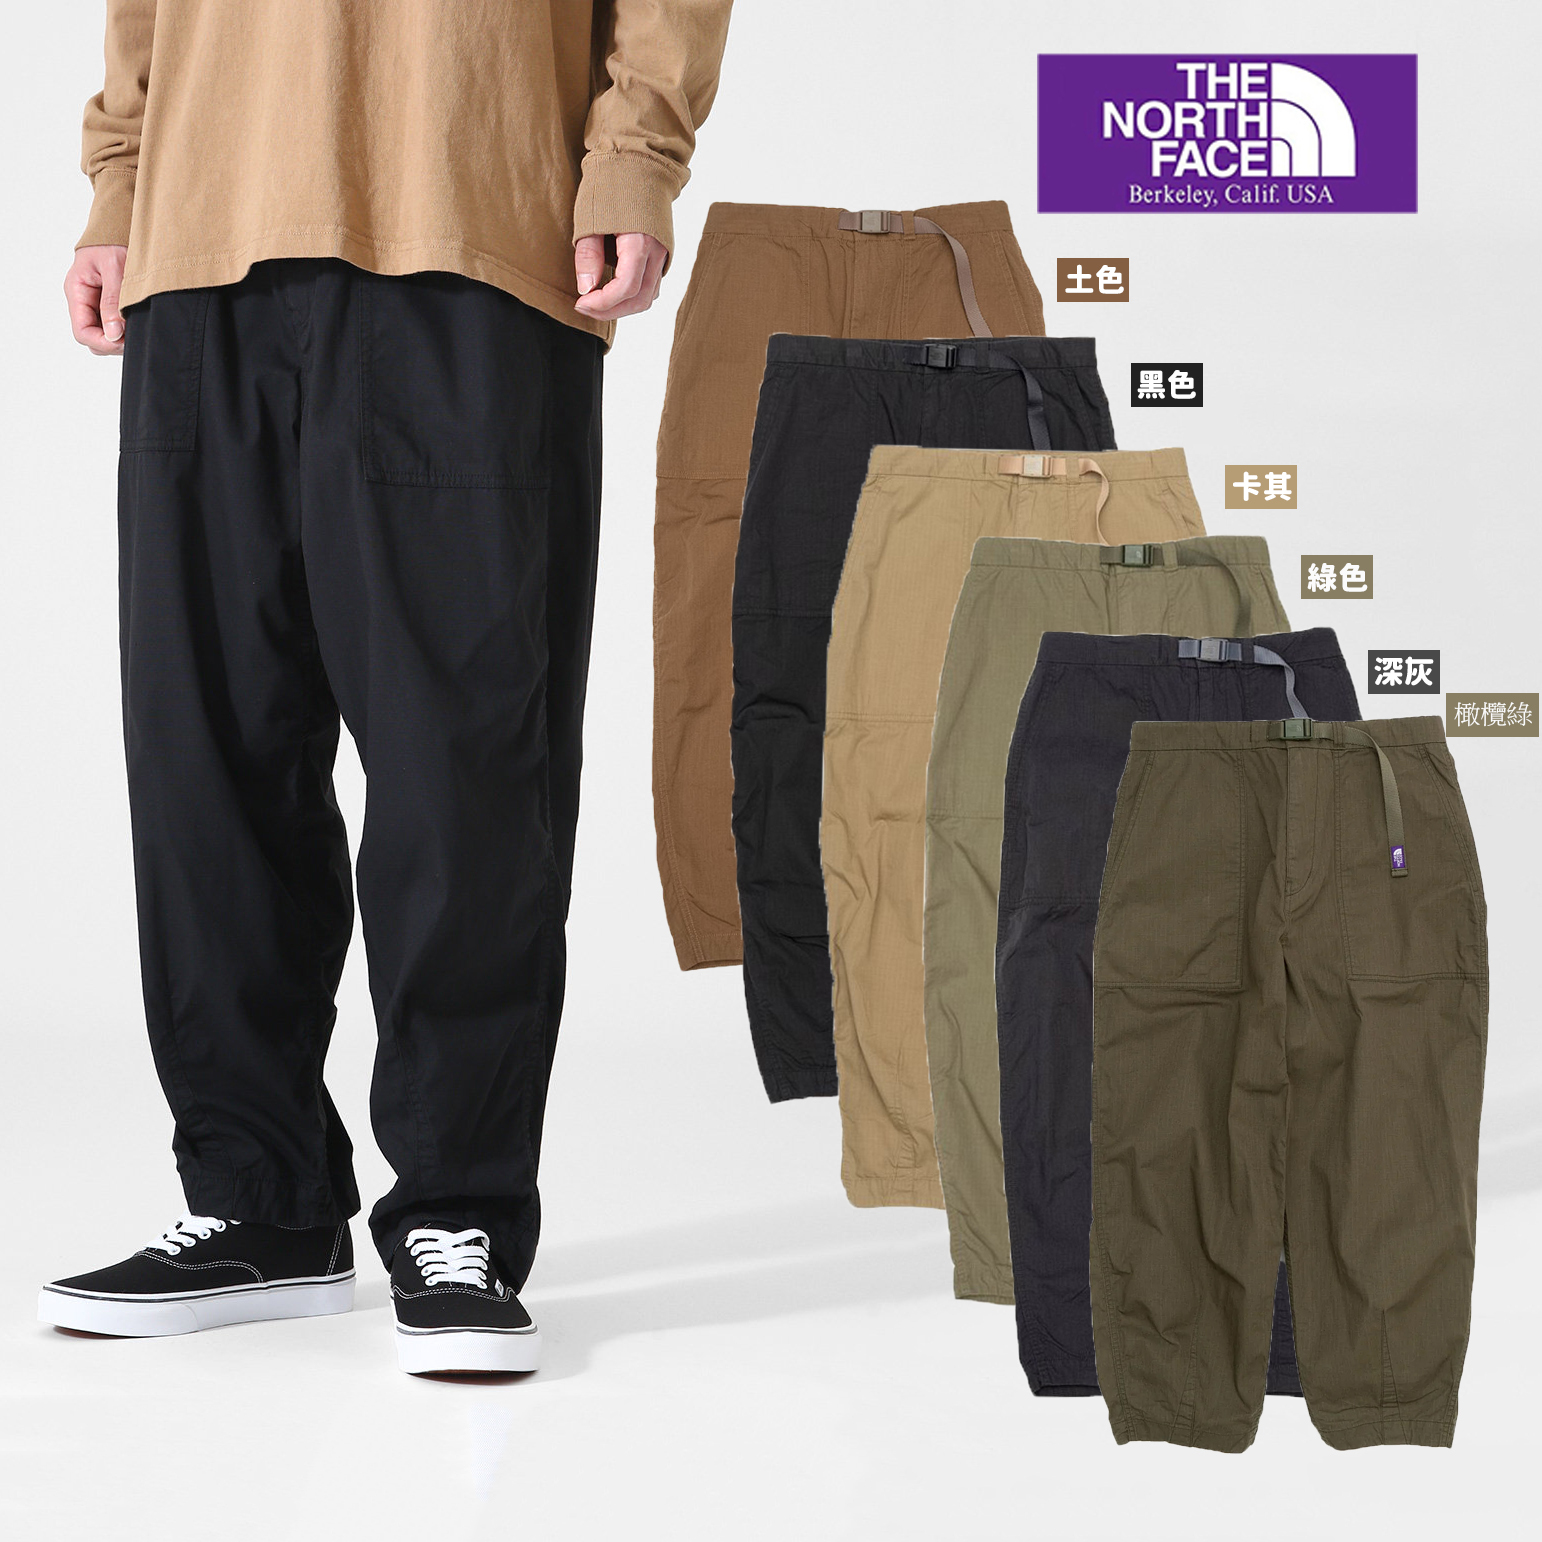 THE NORTH FACE Ripstop Wide Cropped Pants 闊腿褲寬褲nt5064N